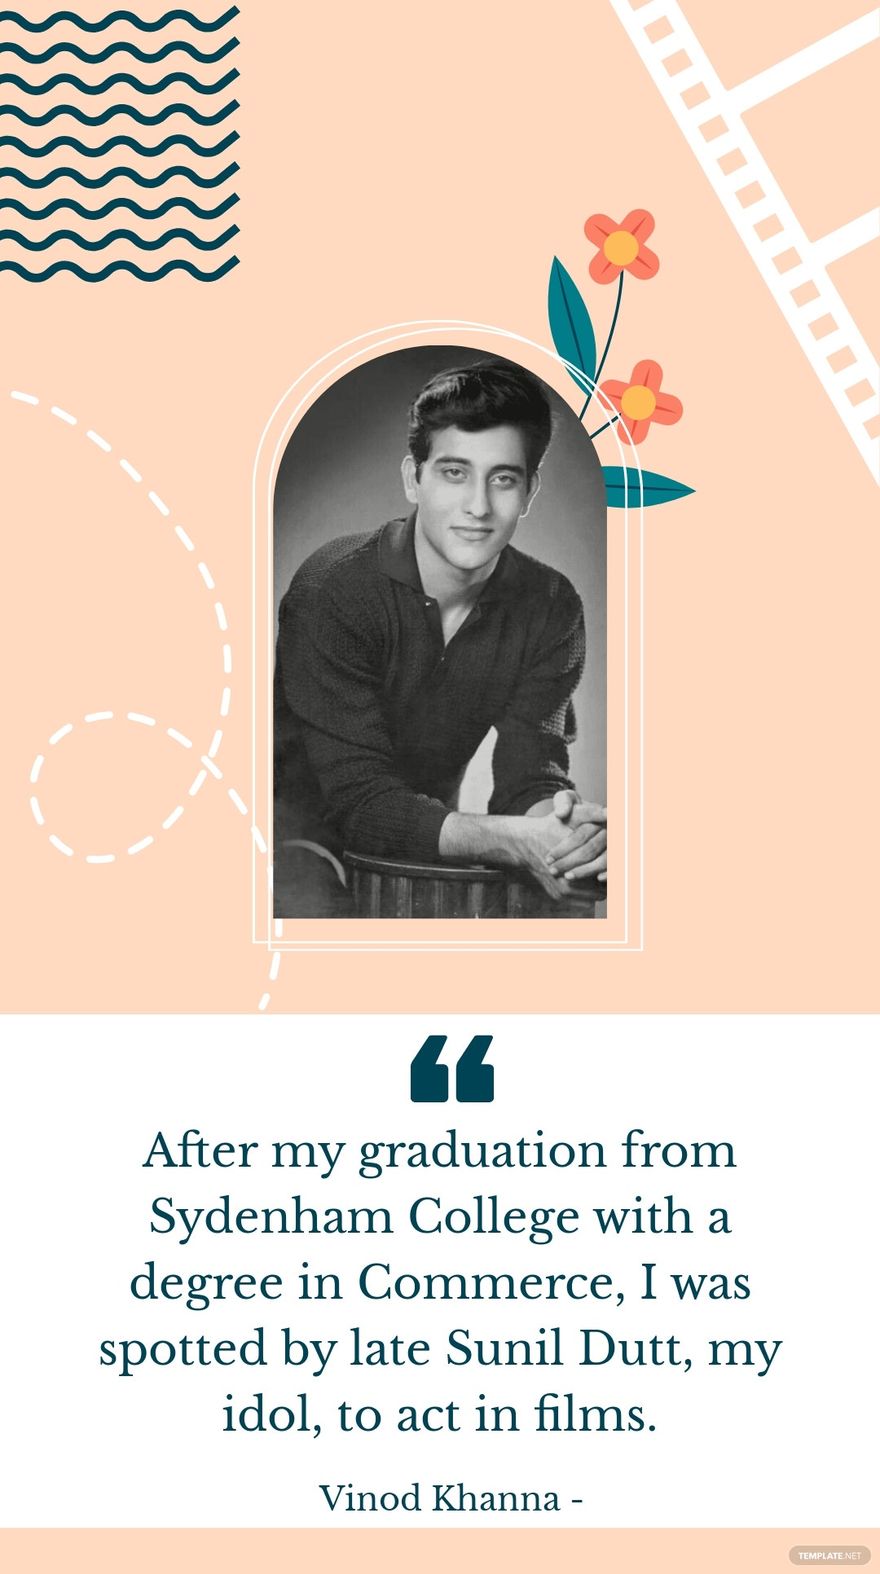 Vinod Khanna - After my graduation from Sydenham College with a degree in Commerce, I was spotted by late Sunil Dutt, my idol, to act in films.